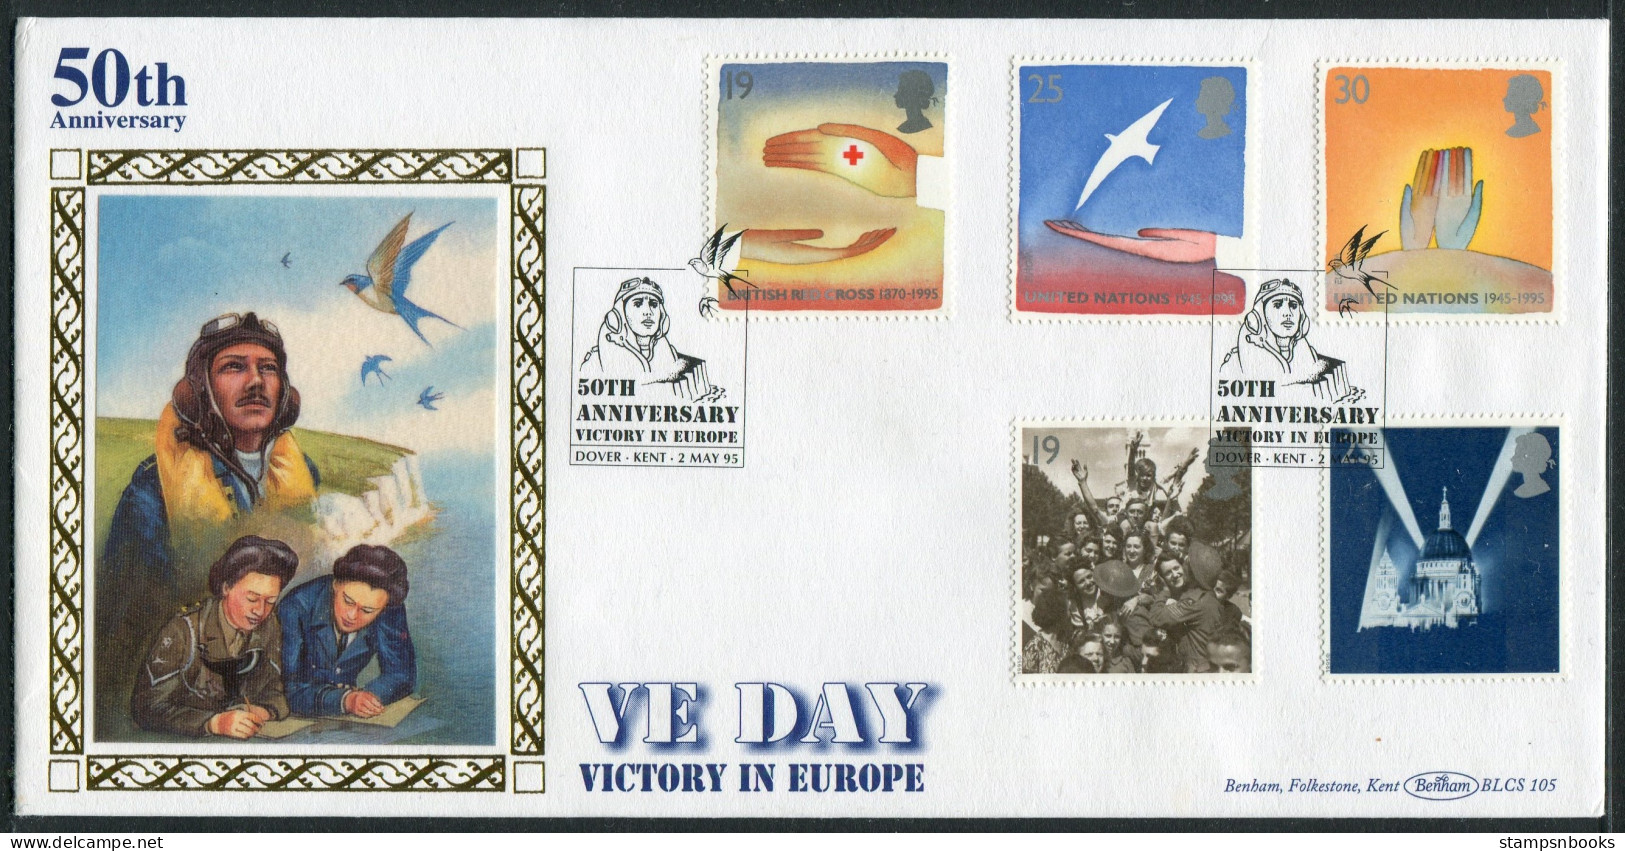 1995 GB VE Day, WW2 Victory In Europe First Day Cover, Dover RAF Benham BLCS 105 FDC - 1991-2000 Dezimalausgaben